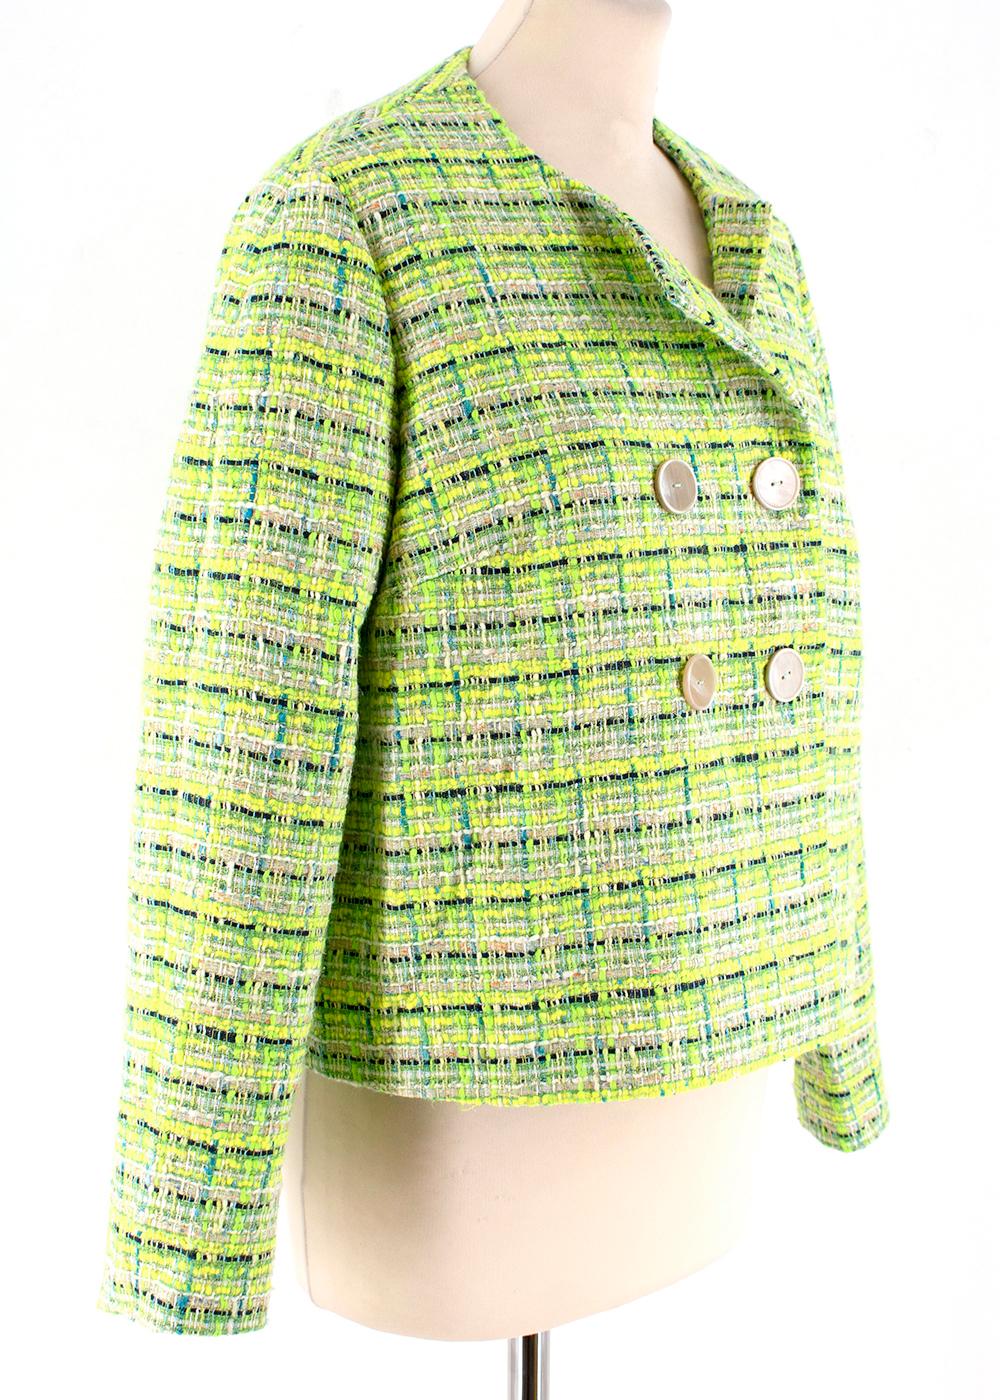 Delpozo Lime Green Woven Jacket and Trouser Set

- Pile weave design
- Double breasted
- Fully lined
- Structured but unpadded shoulders
- Wide pleated leg
- Reinforced waistband 
- Hidden side zipper
- Slit side pockets

Materials:
Wool Blend 
Silk